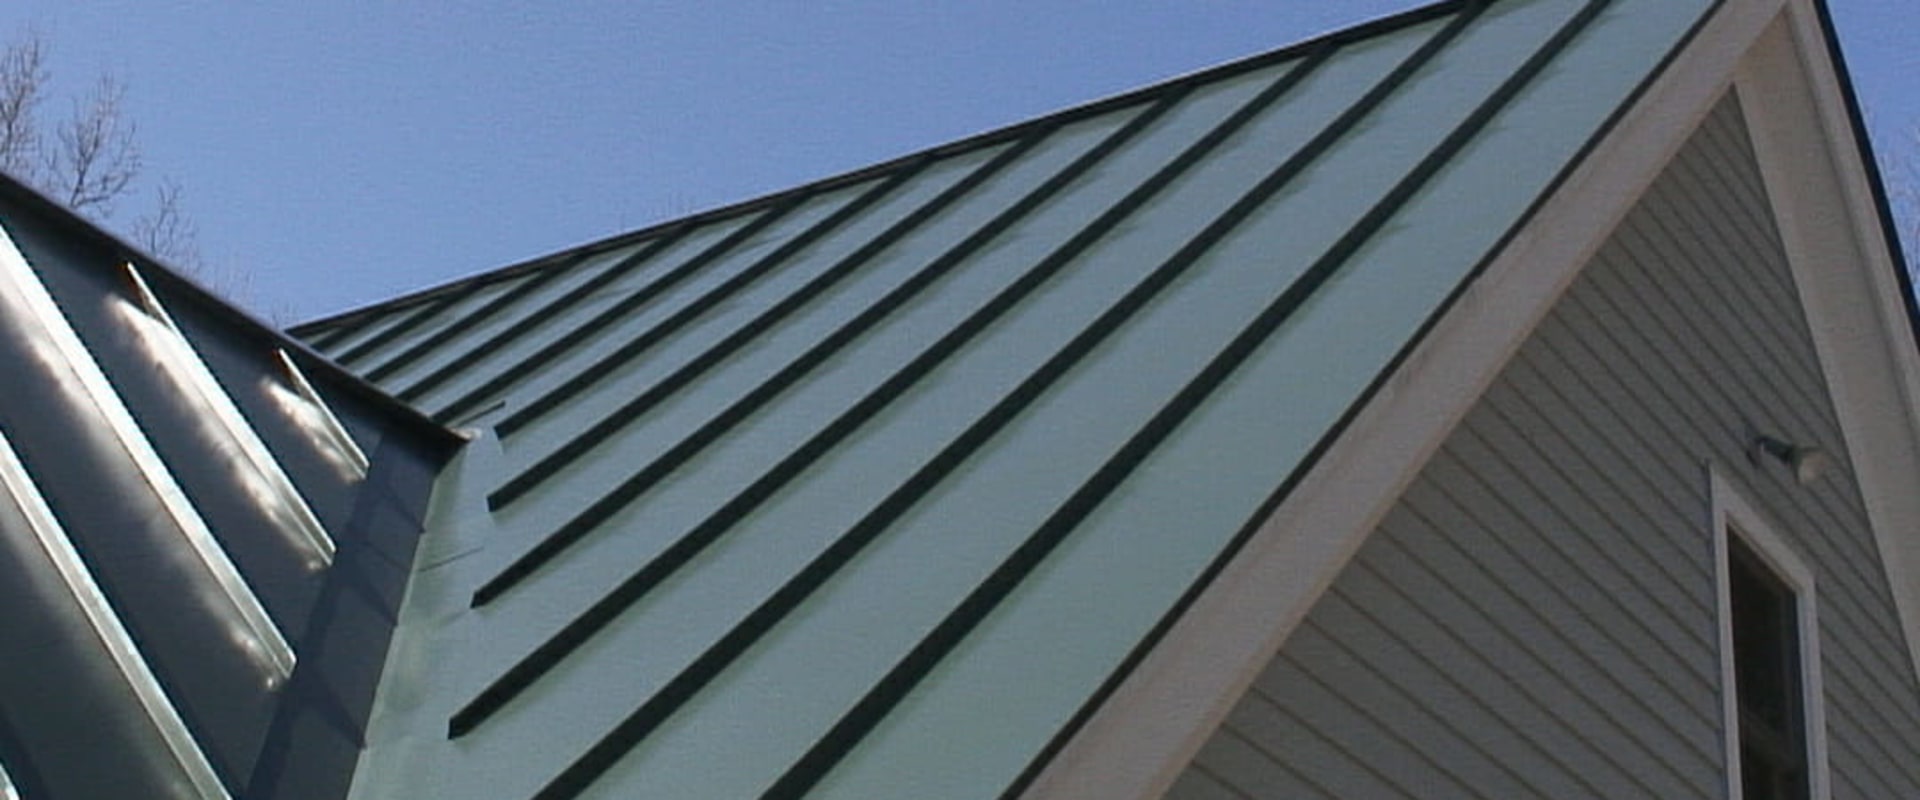 Are metal roofs really expensive?